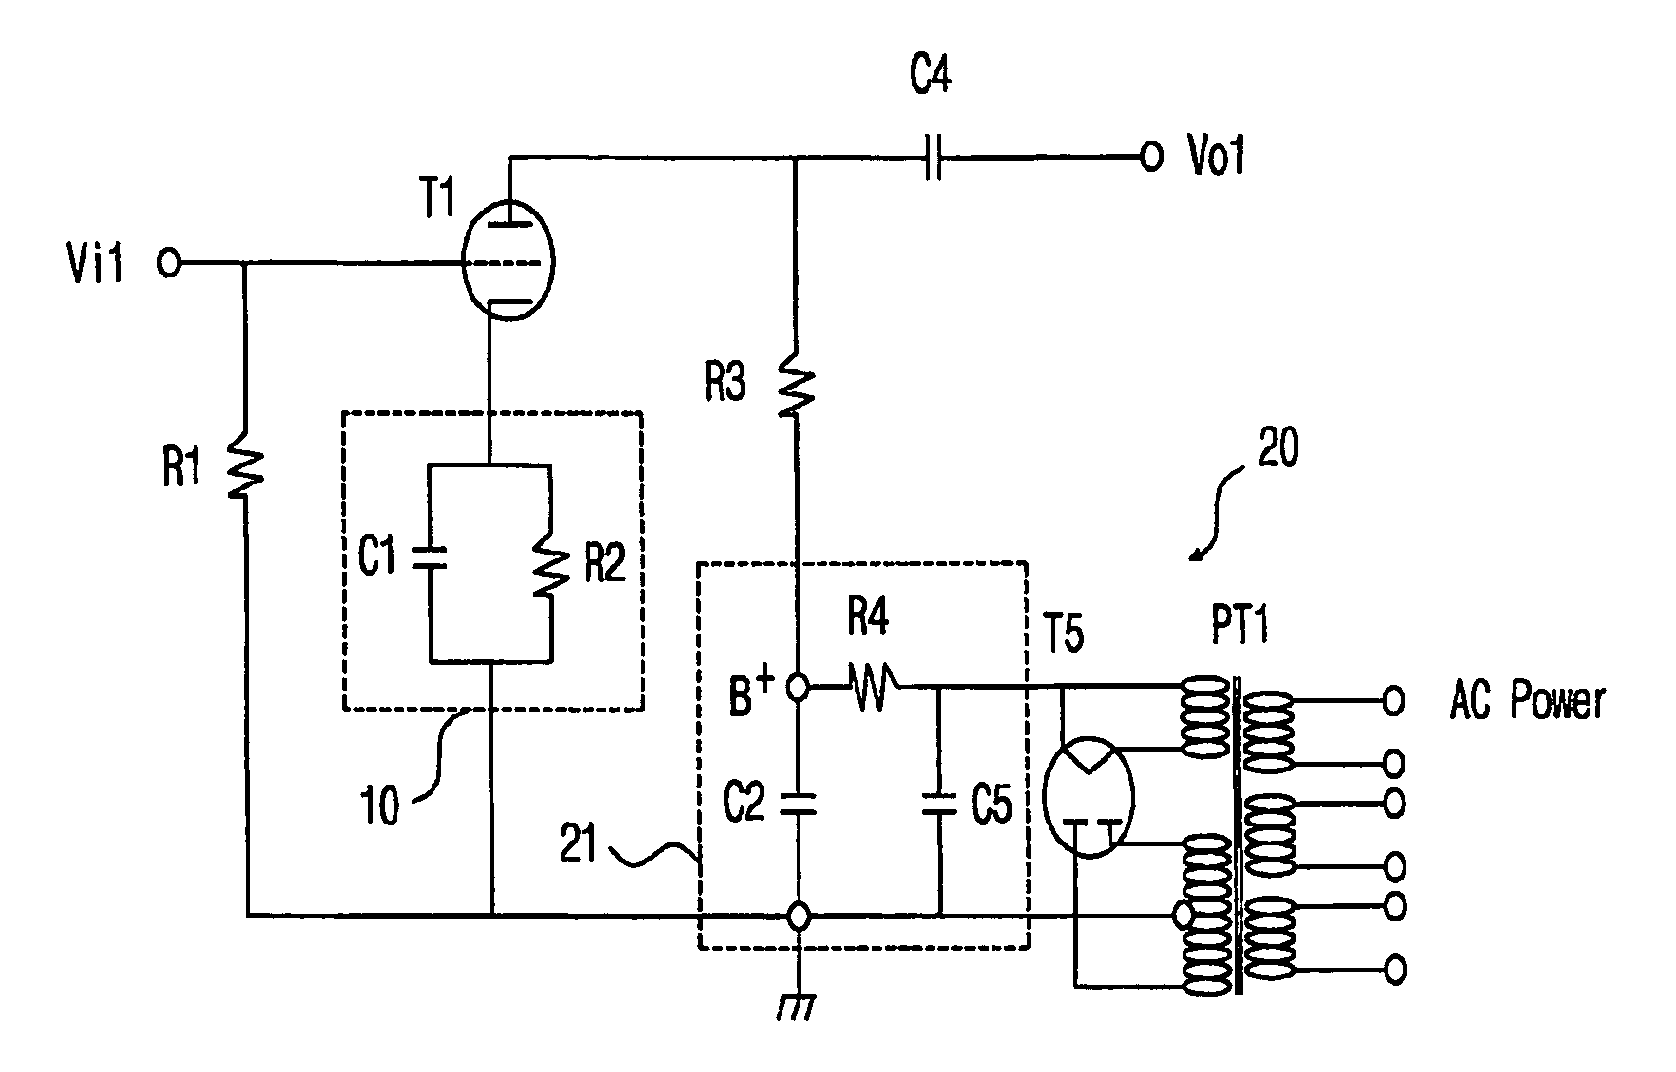 Input/output signals preserver circuit of amplification circuits